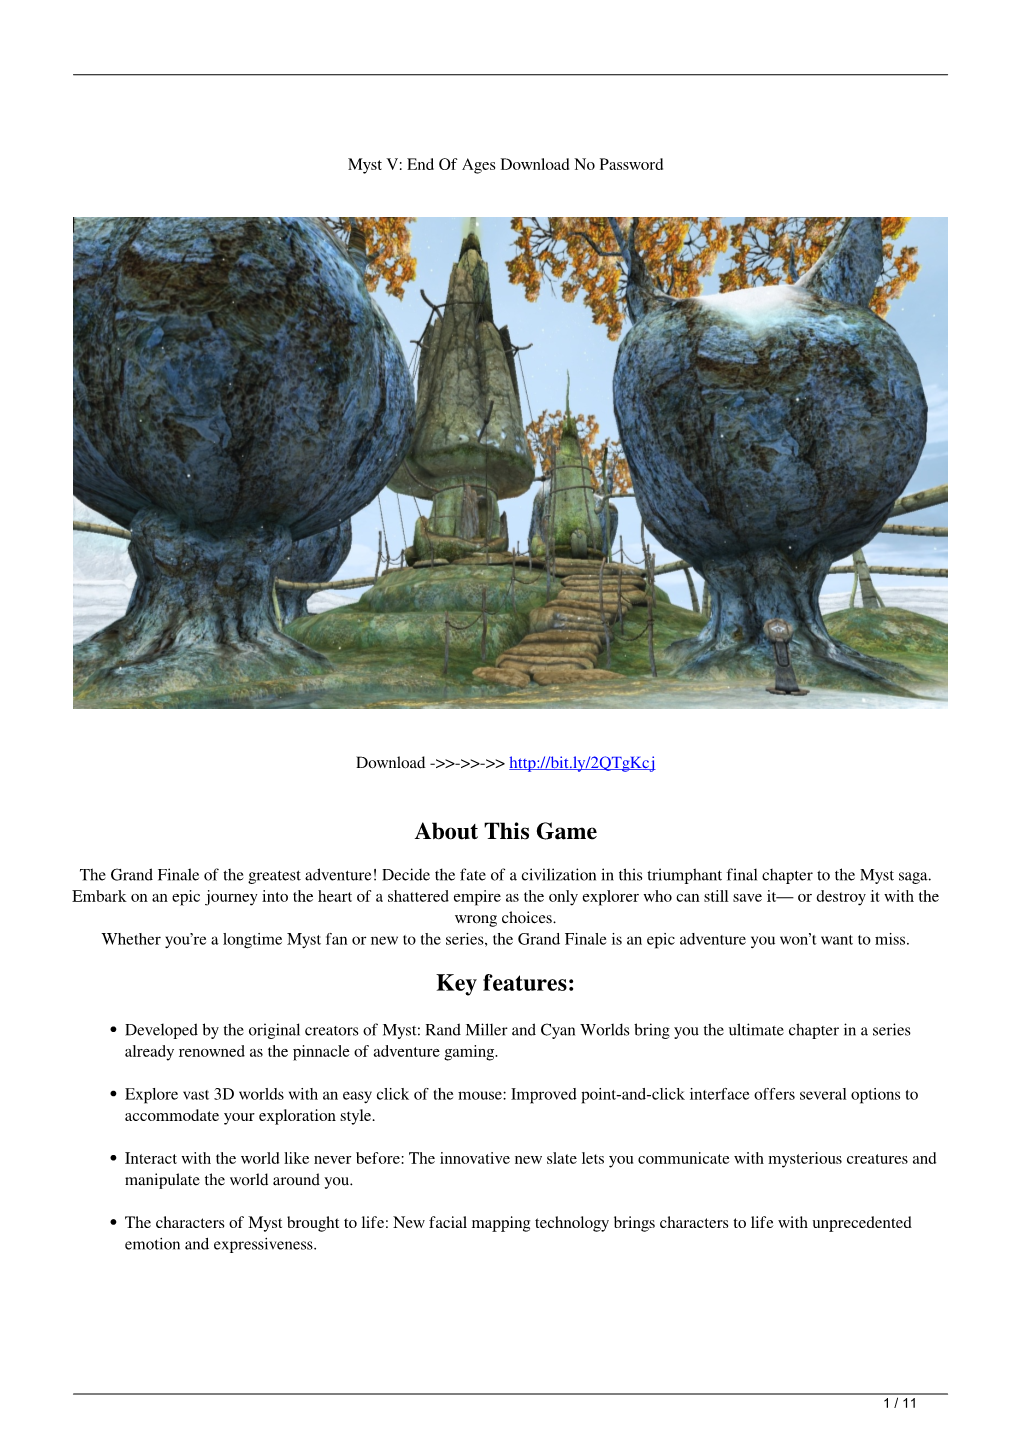 Myst V End of Ages Download No Password